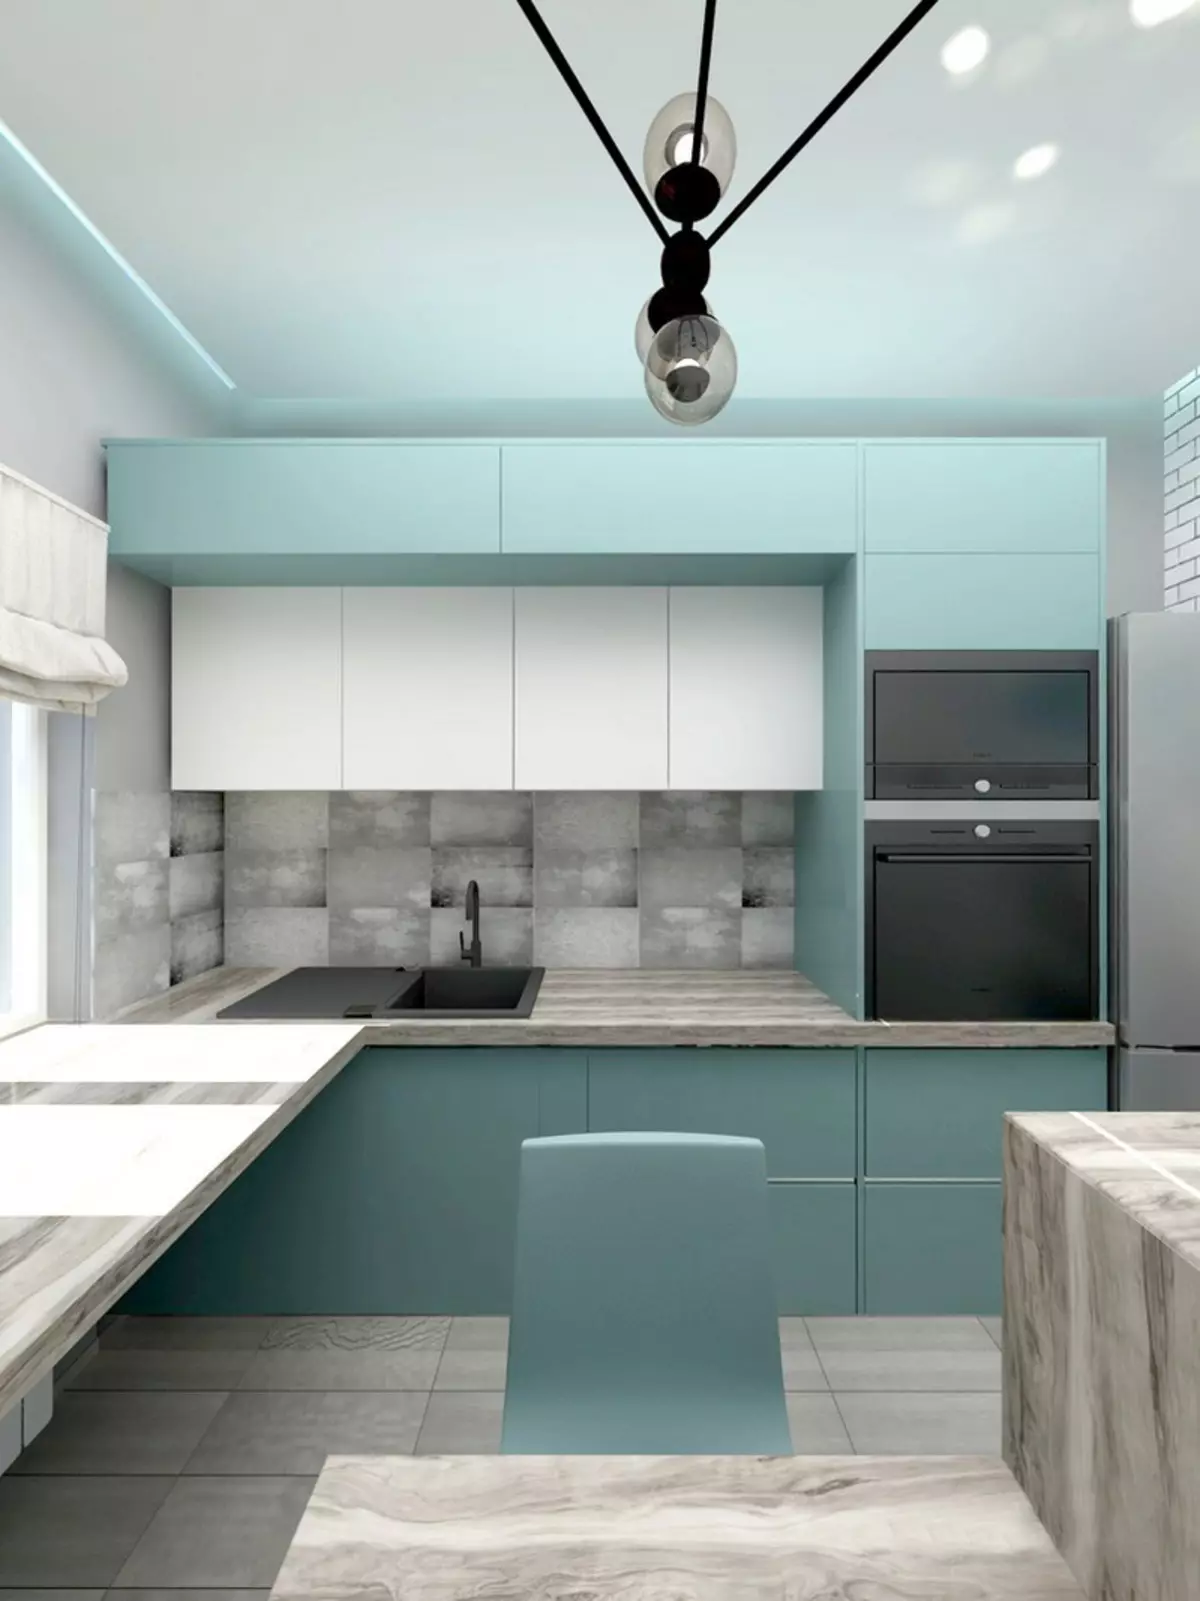 Turquoise kitchen (80 photos): selection of kitchen headset of turquoise-white and gray-turquoise color in the interior, combination of turquoise with beige and Tiffany's color 21083_7